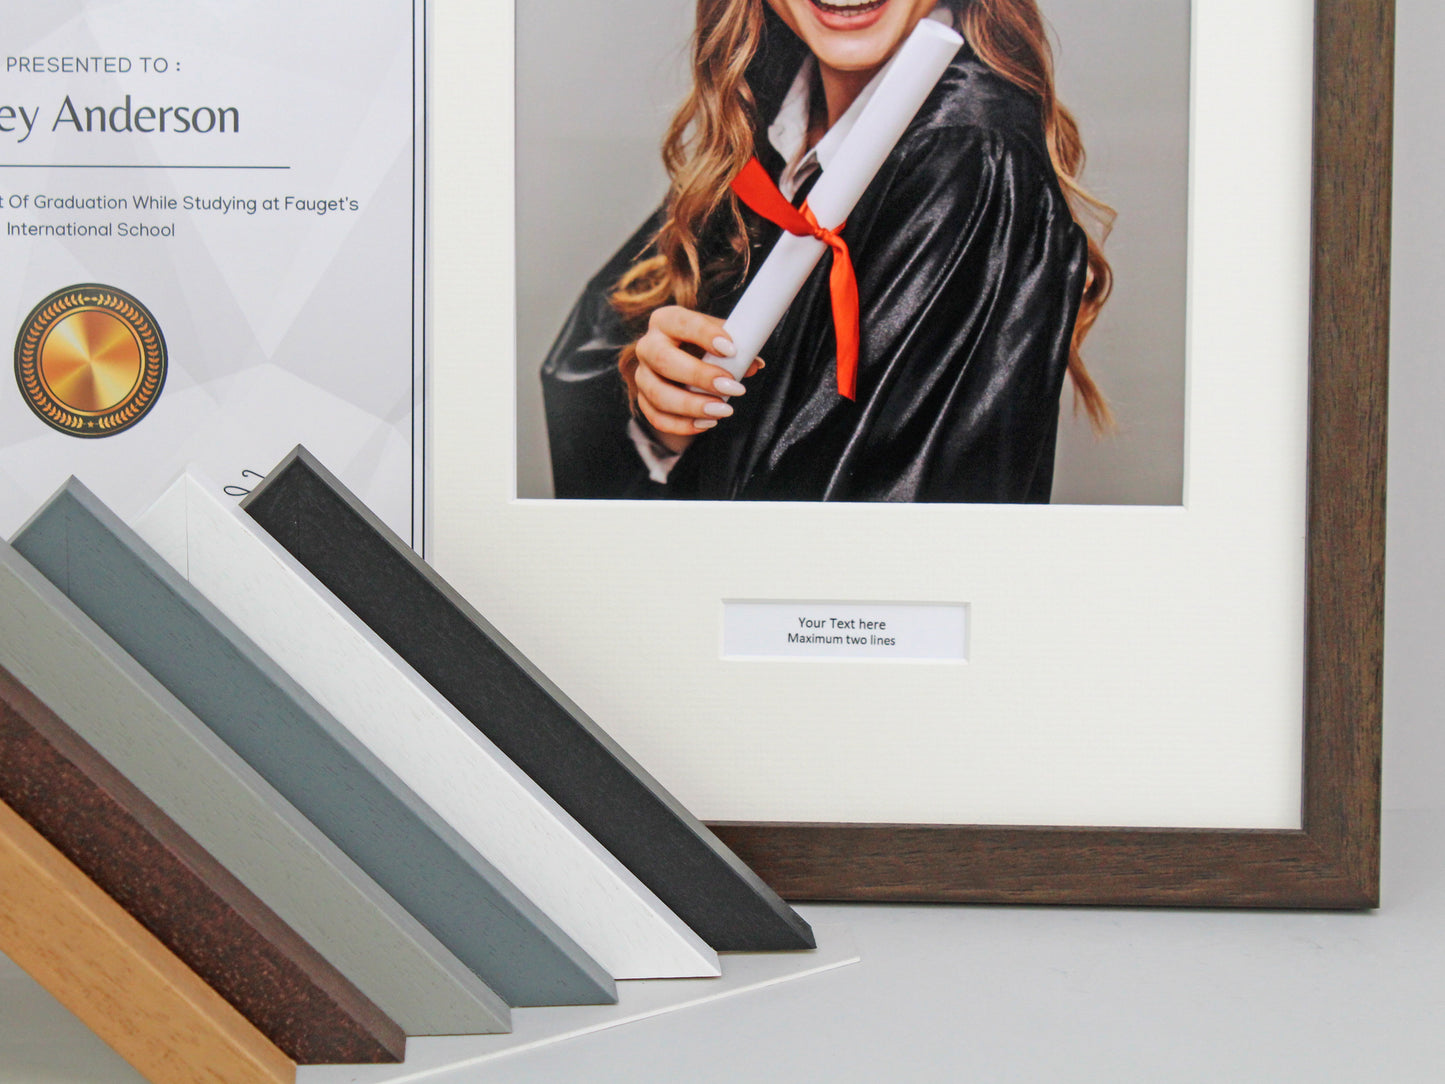 Personalised Certificate, Graduation, Diploma Frame with Two Photos. Suits an A4 sized Photo/Certificate and Two 5x7" Photos. - PhotoFramesandMore - Wooden Picture Frames